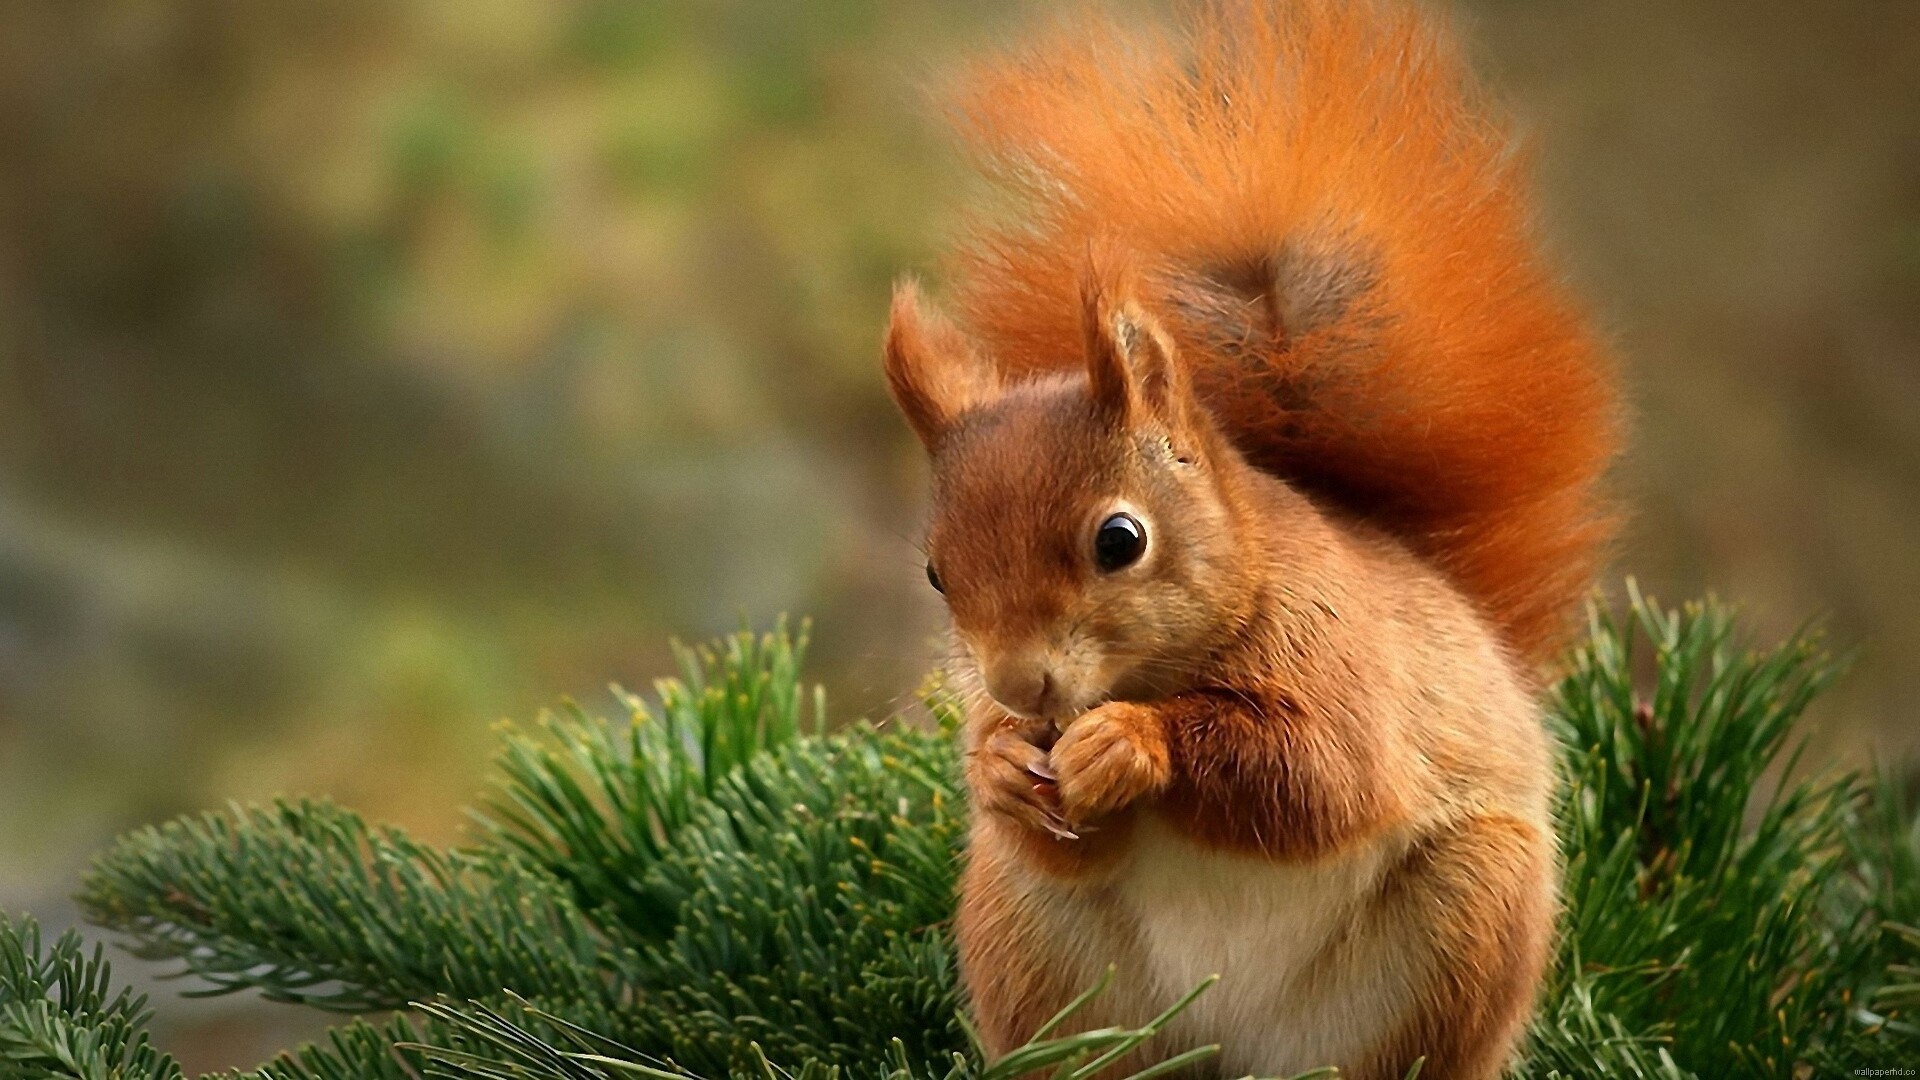 Squirrel: A small animal covered in fur with a long tail. 1920x1080 Full HD Background.